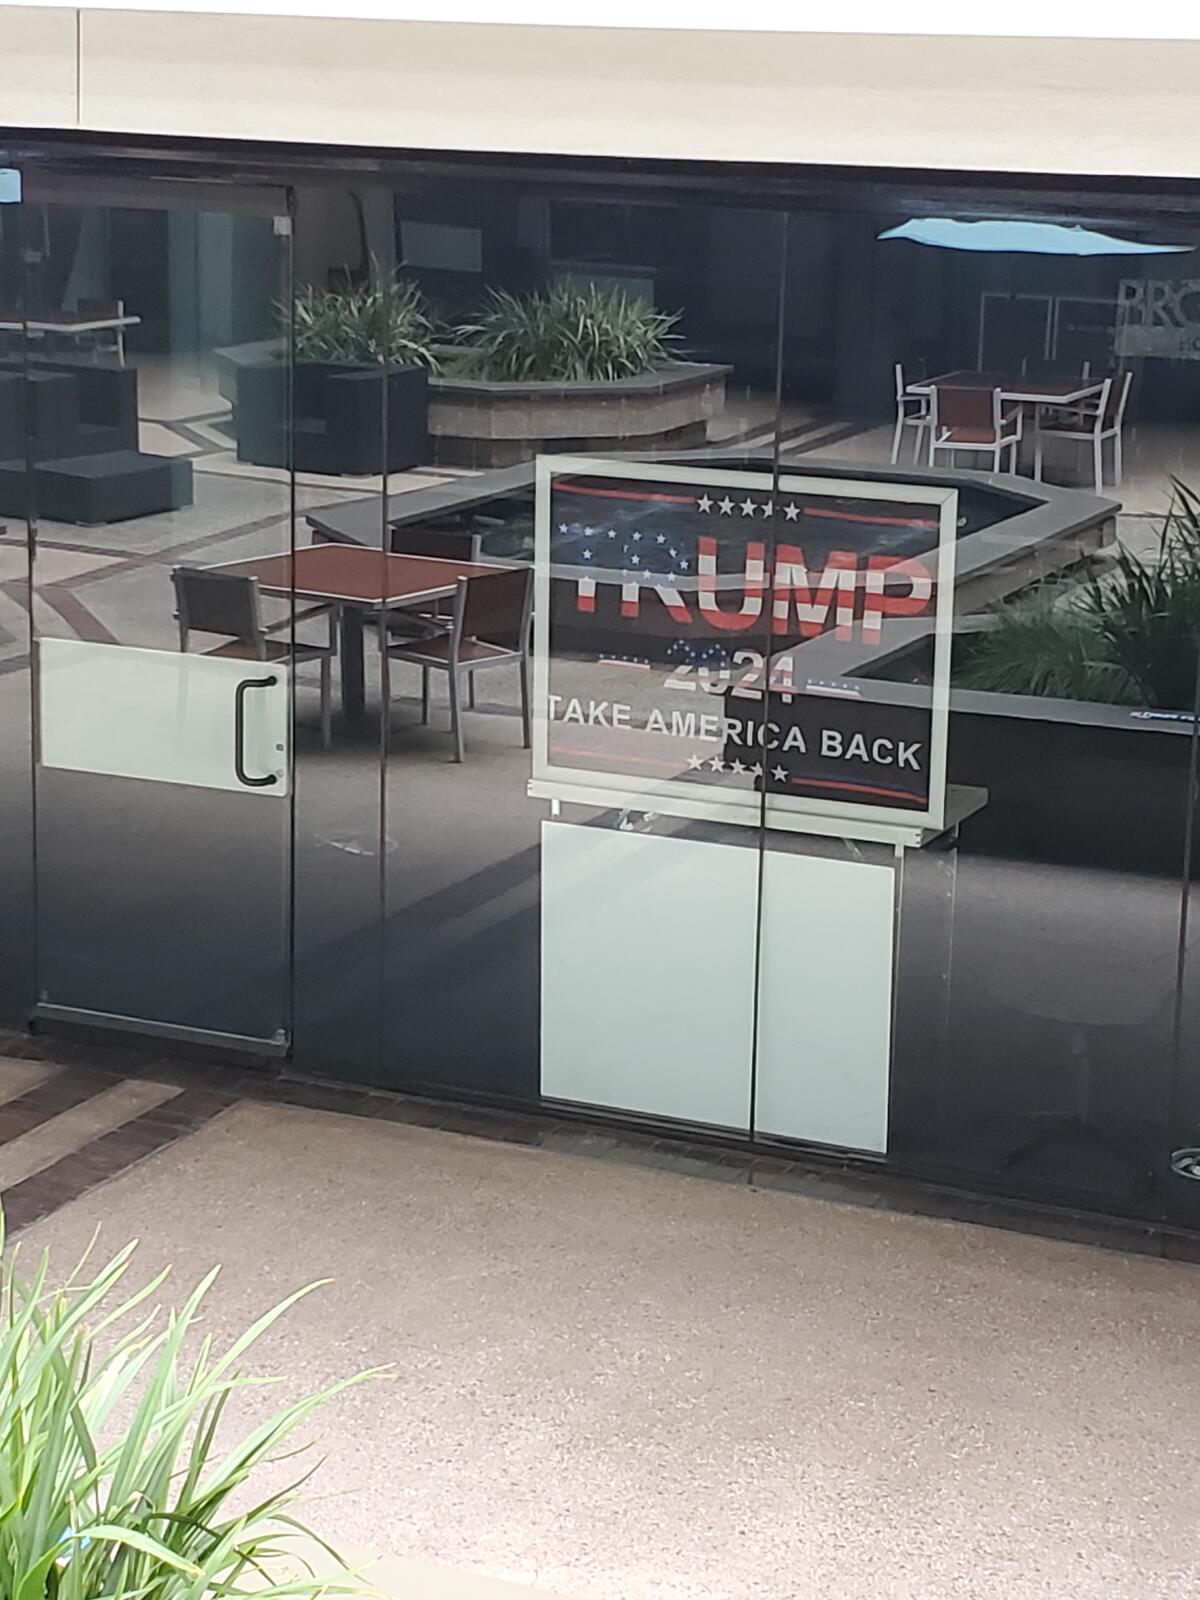 Signs posted in the Merrill Lynch building in La Jolla show support for Donald Trump's 2024 presidential campaign.